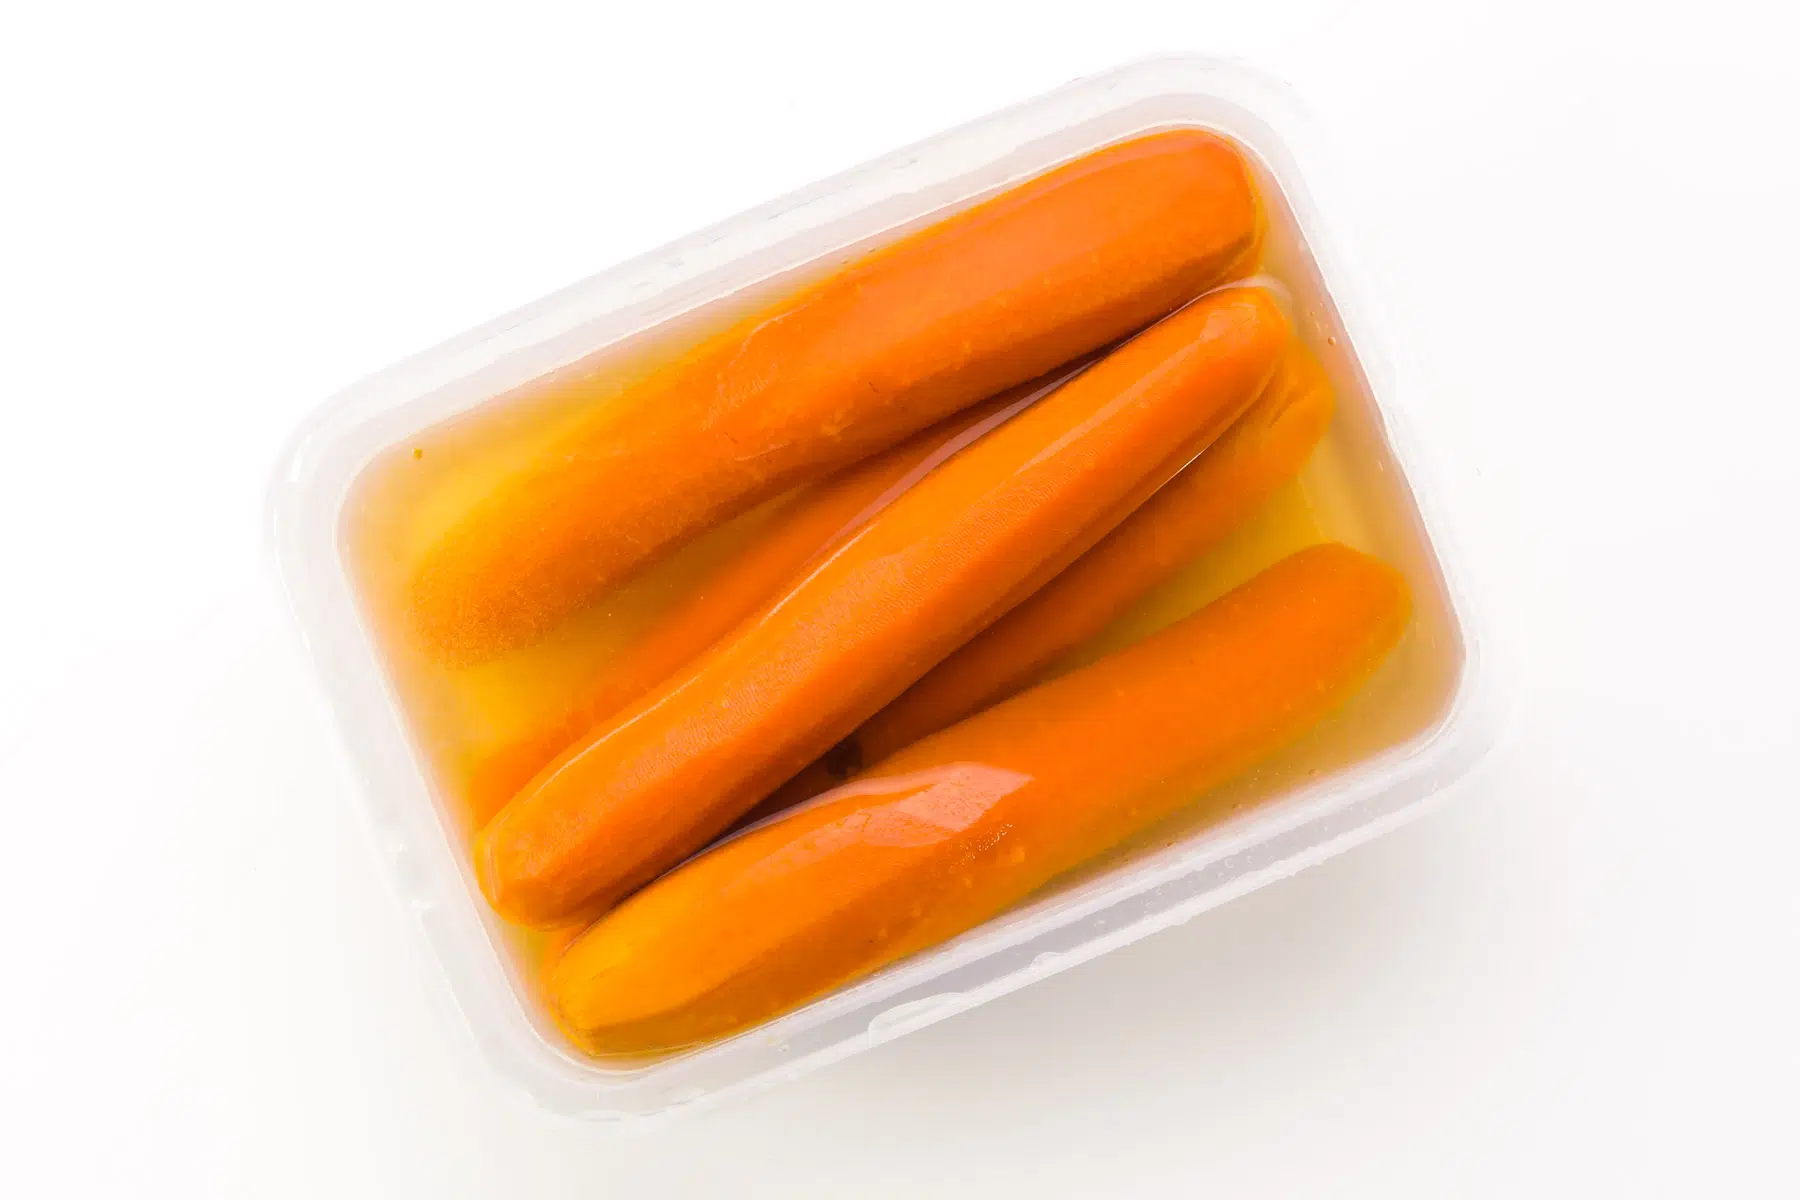 Carrots are being cooled in water in a storage container.